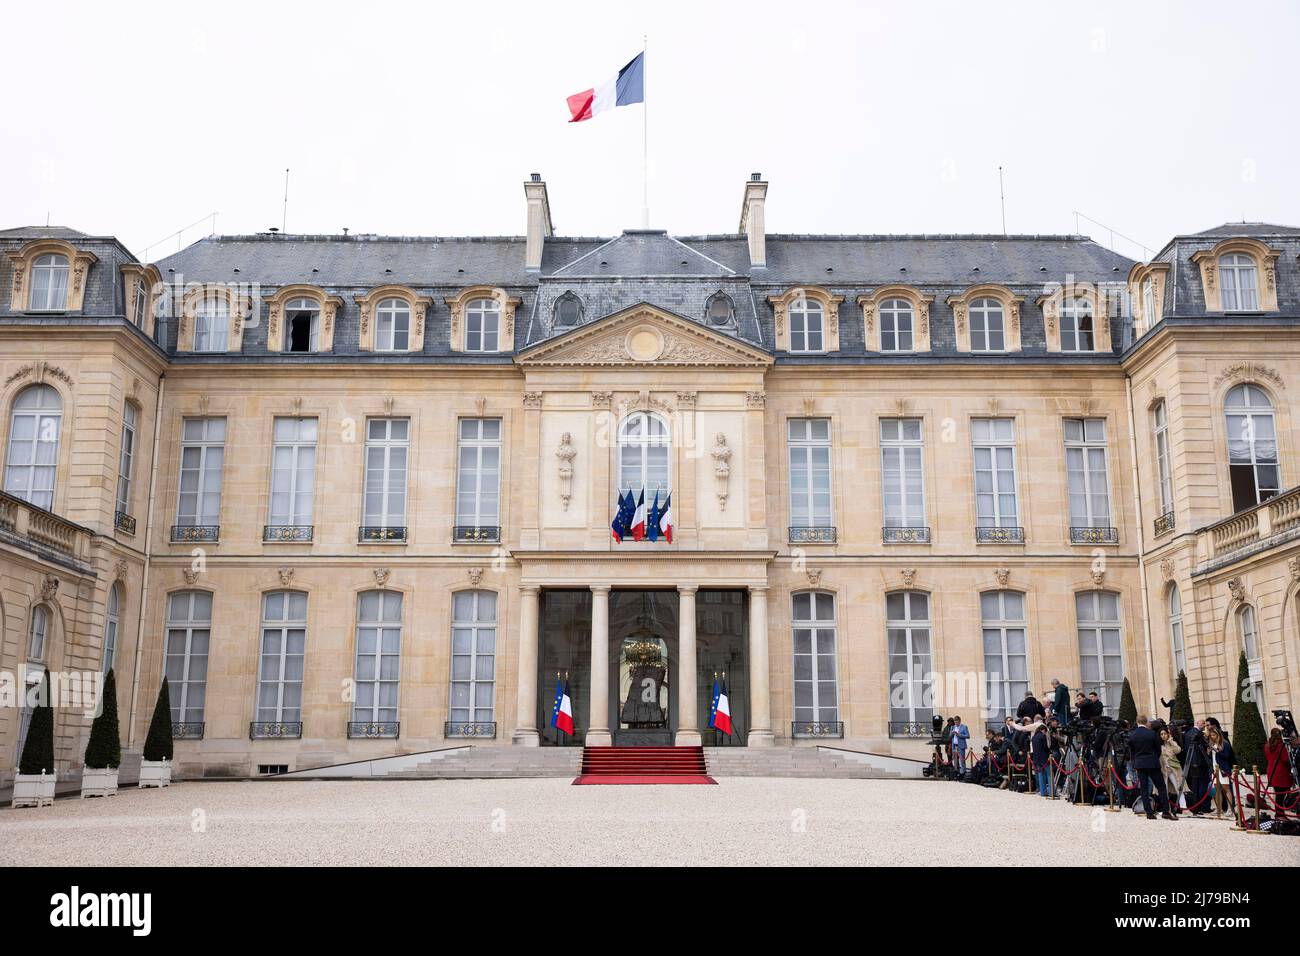 May 7, 2022, Paris, France, France: Journalists wait in the courtyard of the Elysee presidential palace before the start of the investiture ceremony of Emmanuel Macron as French President, following his re election last April 24. (Credit Image: © Alexis Sciard/IP3 via ZUMA Press) Stock Photo